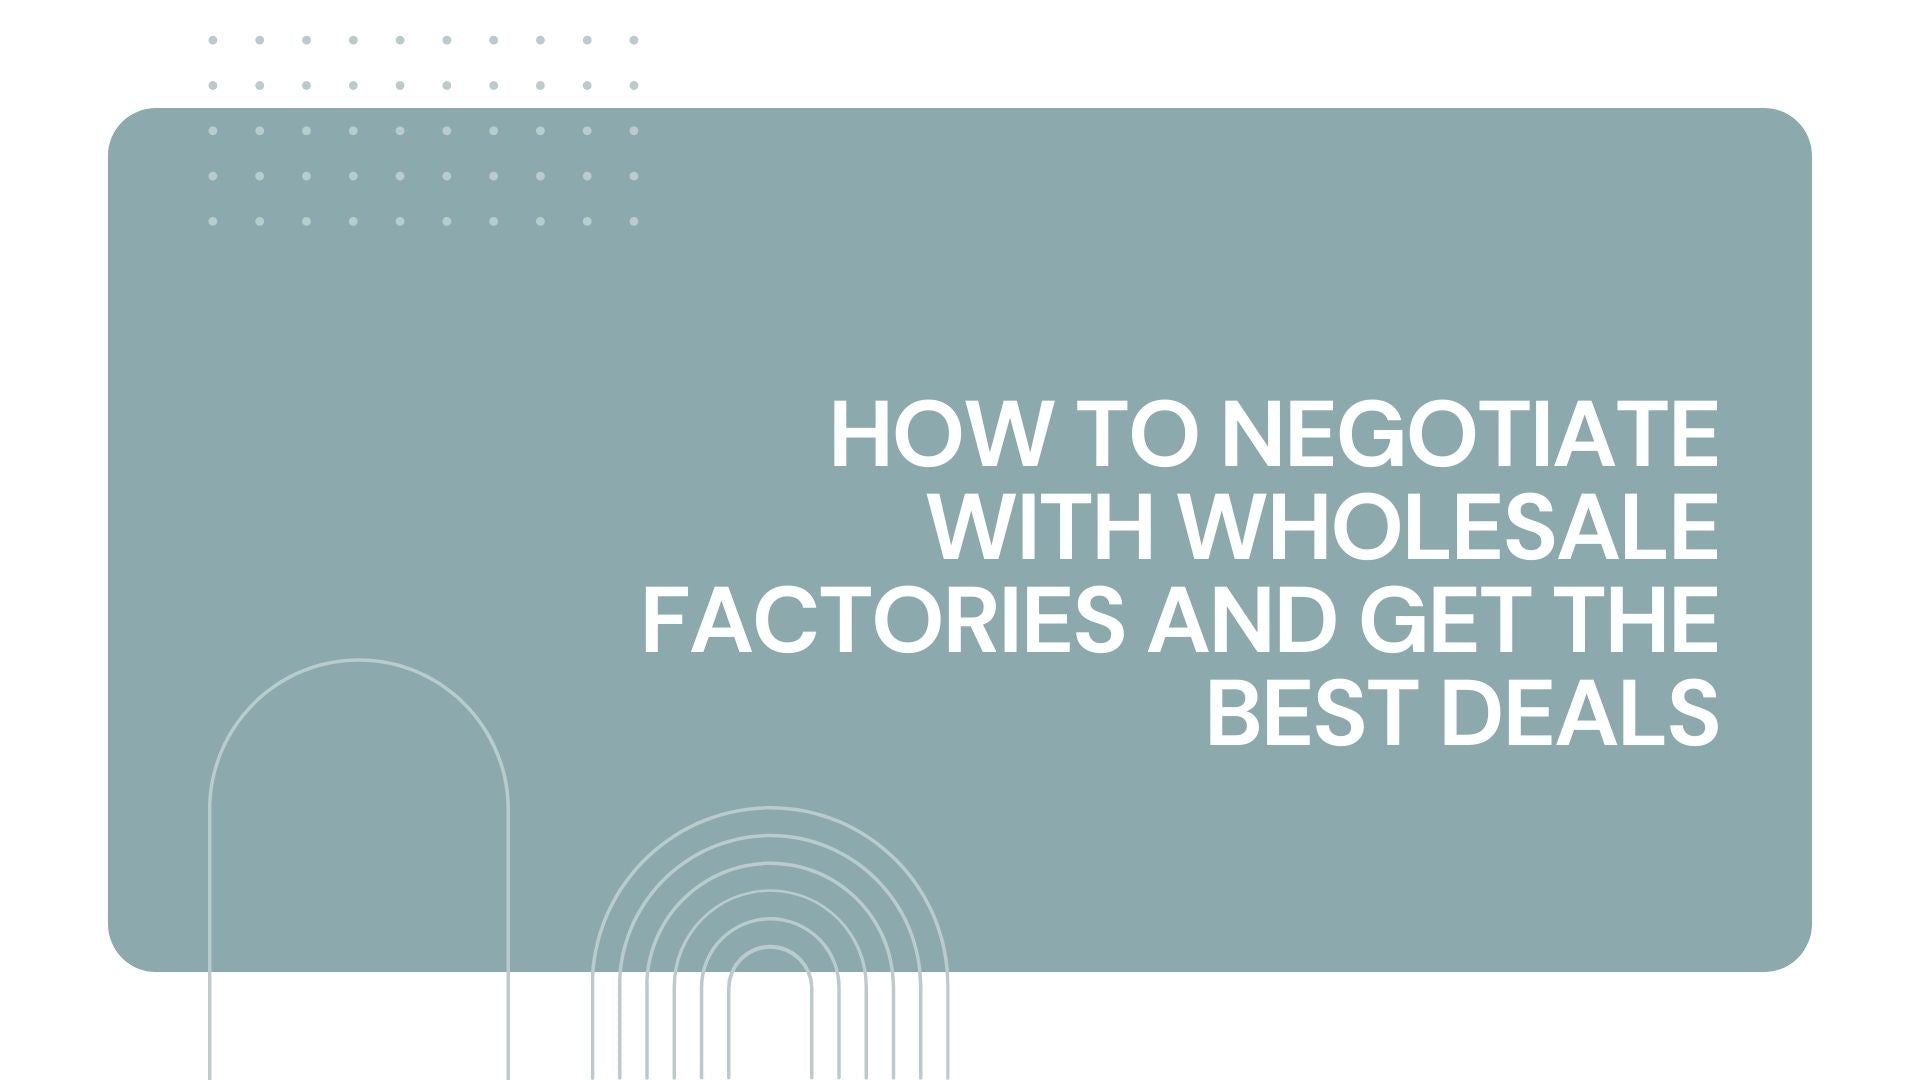 How to Negotiate with Wholesale Factories and Get the Best Deals